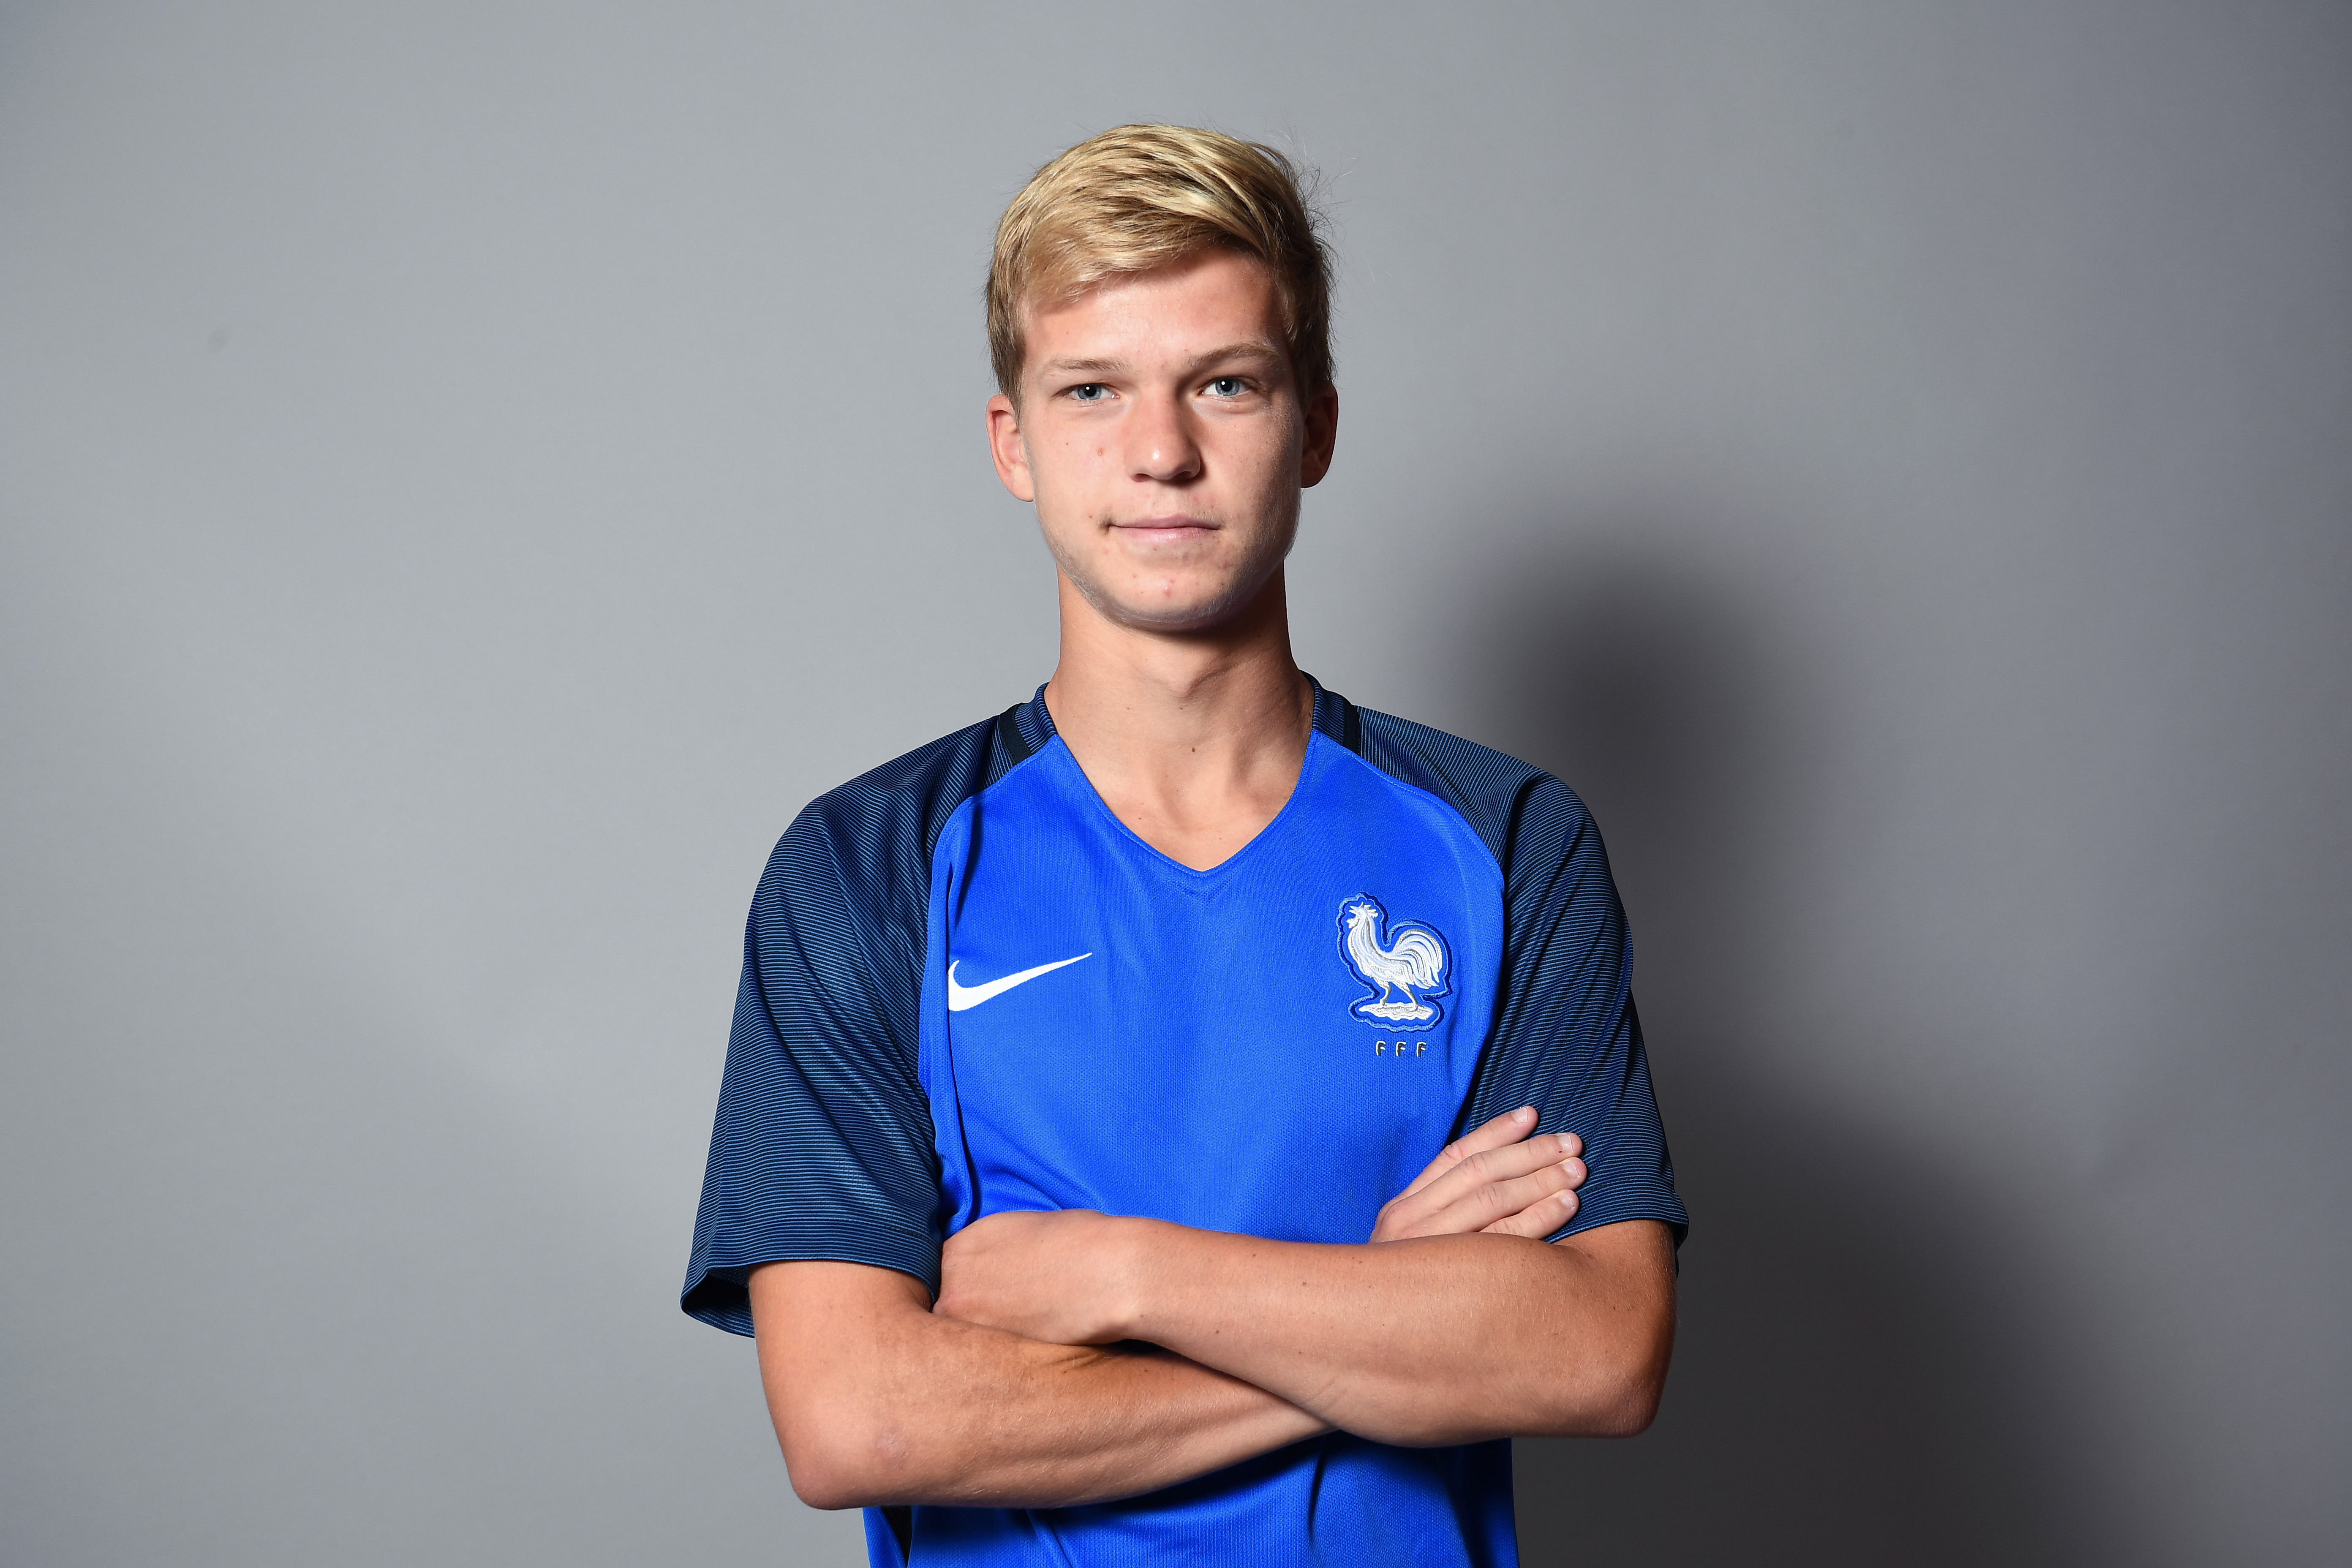 France's under 21 national football team midfielder Vincent Koziello poses on August 30, 2016 in Clairefontaine-en-Yvelines, near Paris. / AFP / FRANCK FIFE        (Photo credit should read FRANCK FIFE/AFP/Getty Images)